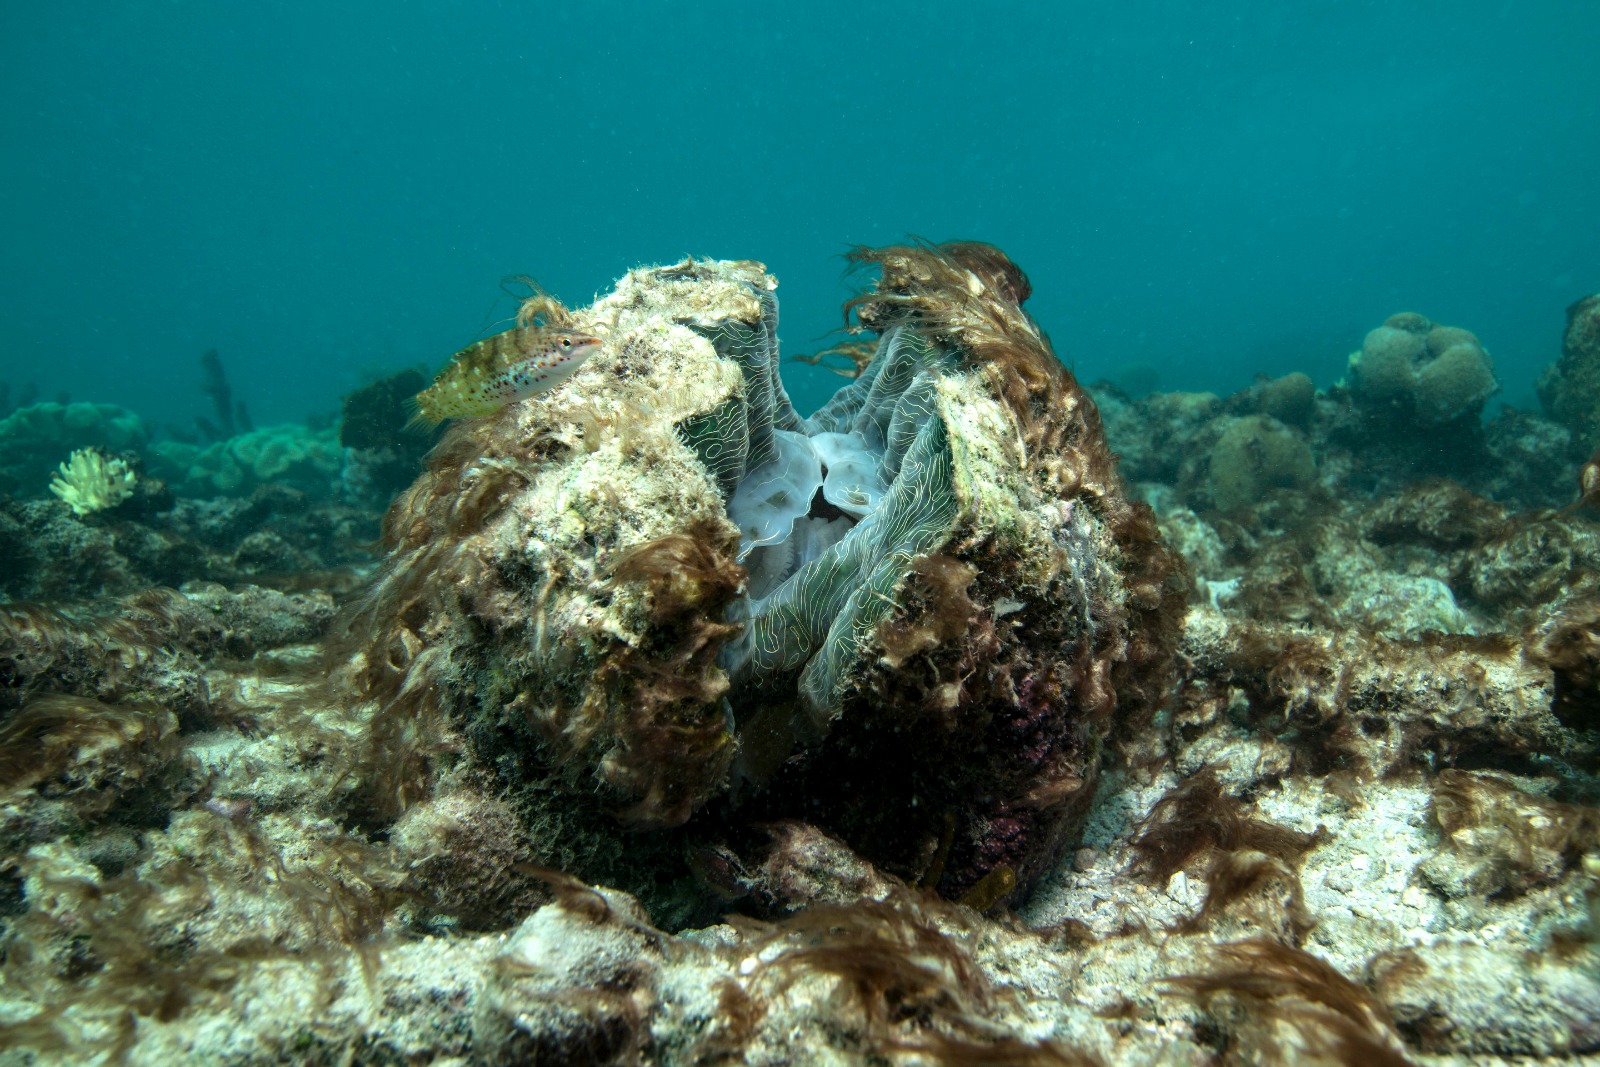 A dying Giant Clam on the Great Barrier Reef.